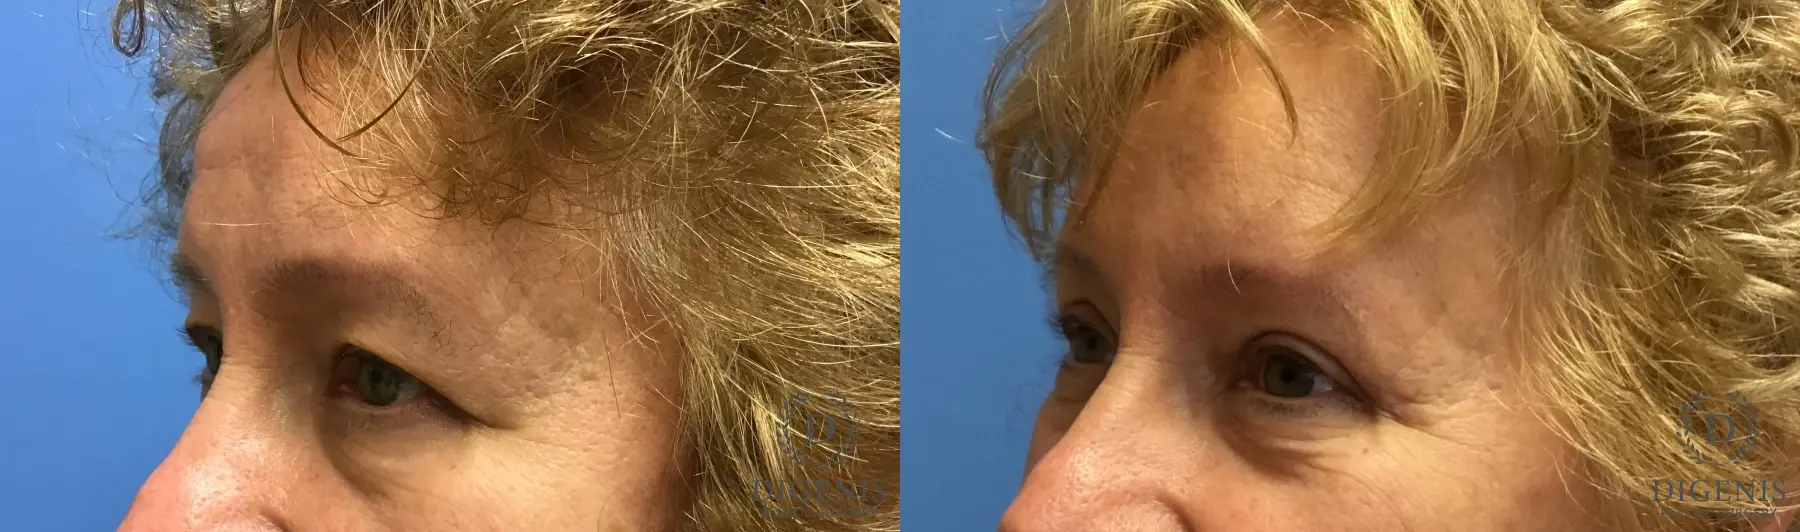 Eyelid Surgery: Patient 4 - Before and After 4